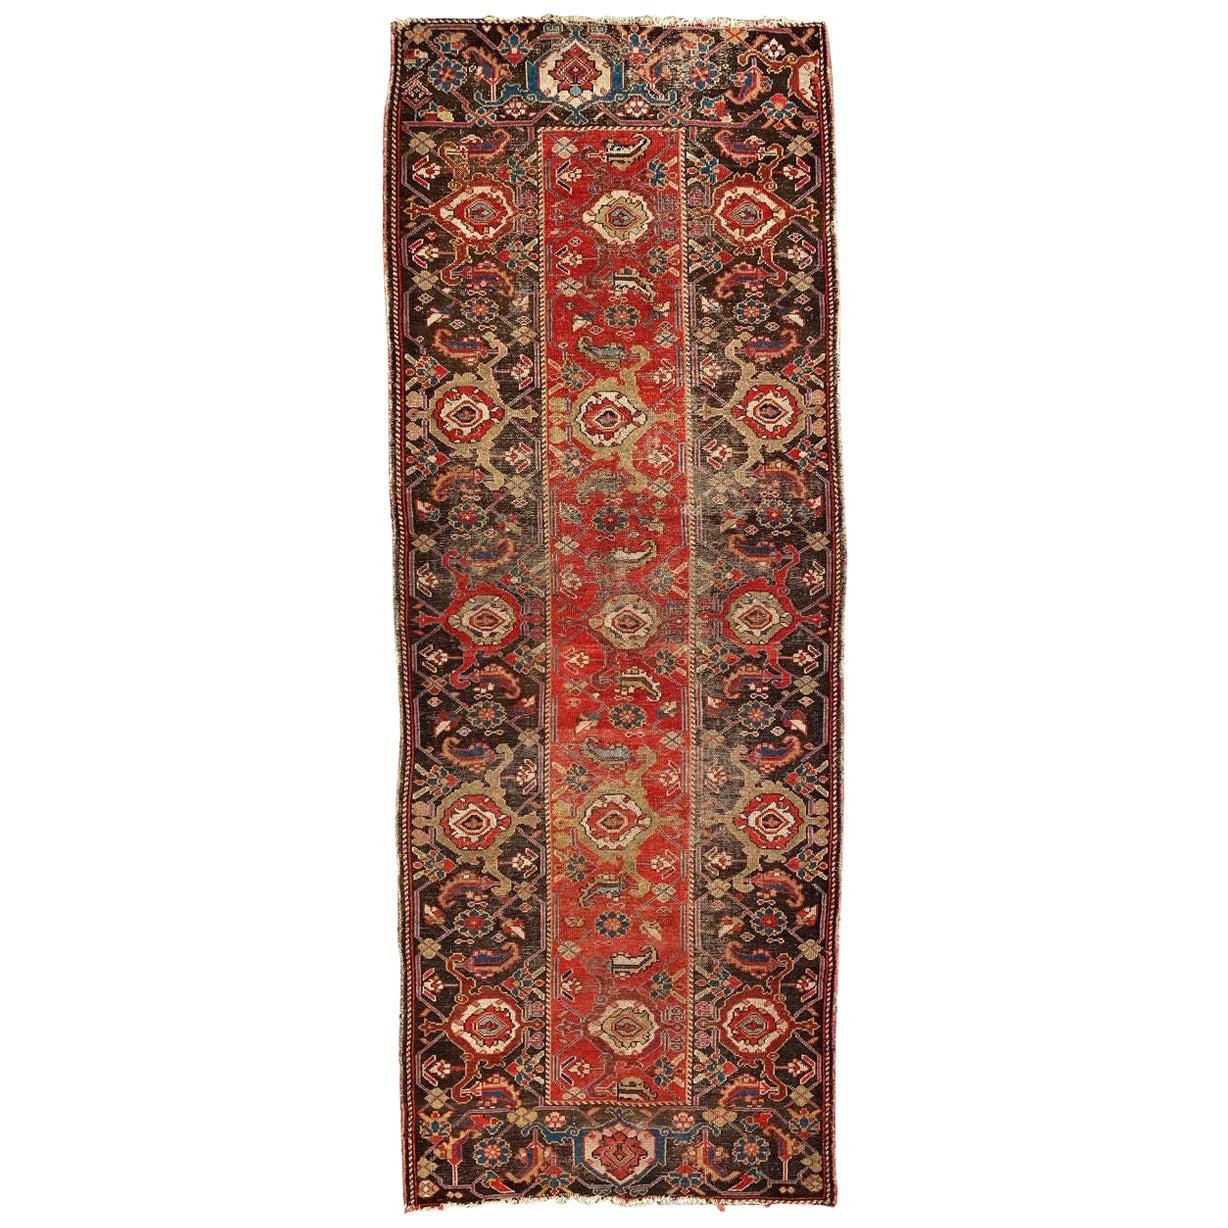 Bobyrug’s Beautiful and Rare Antique Malayer Runner For Sale